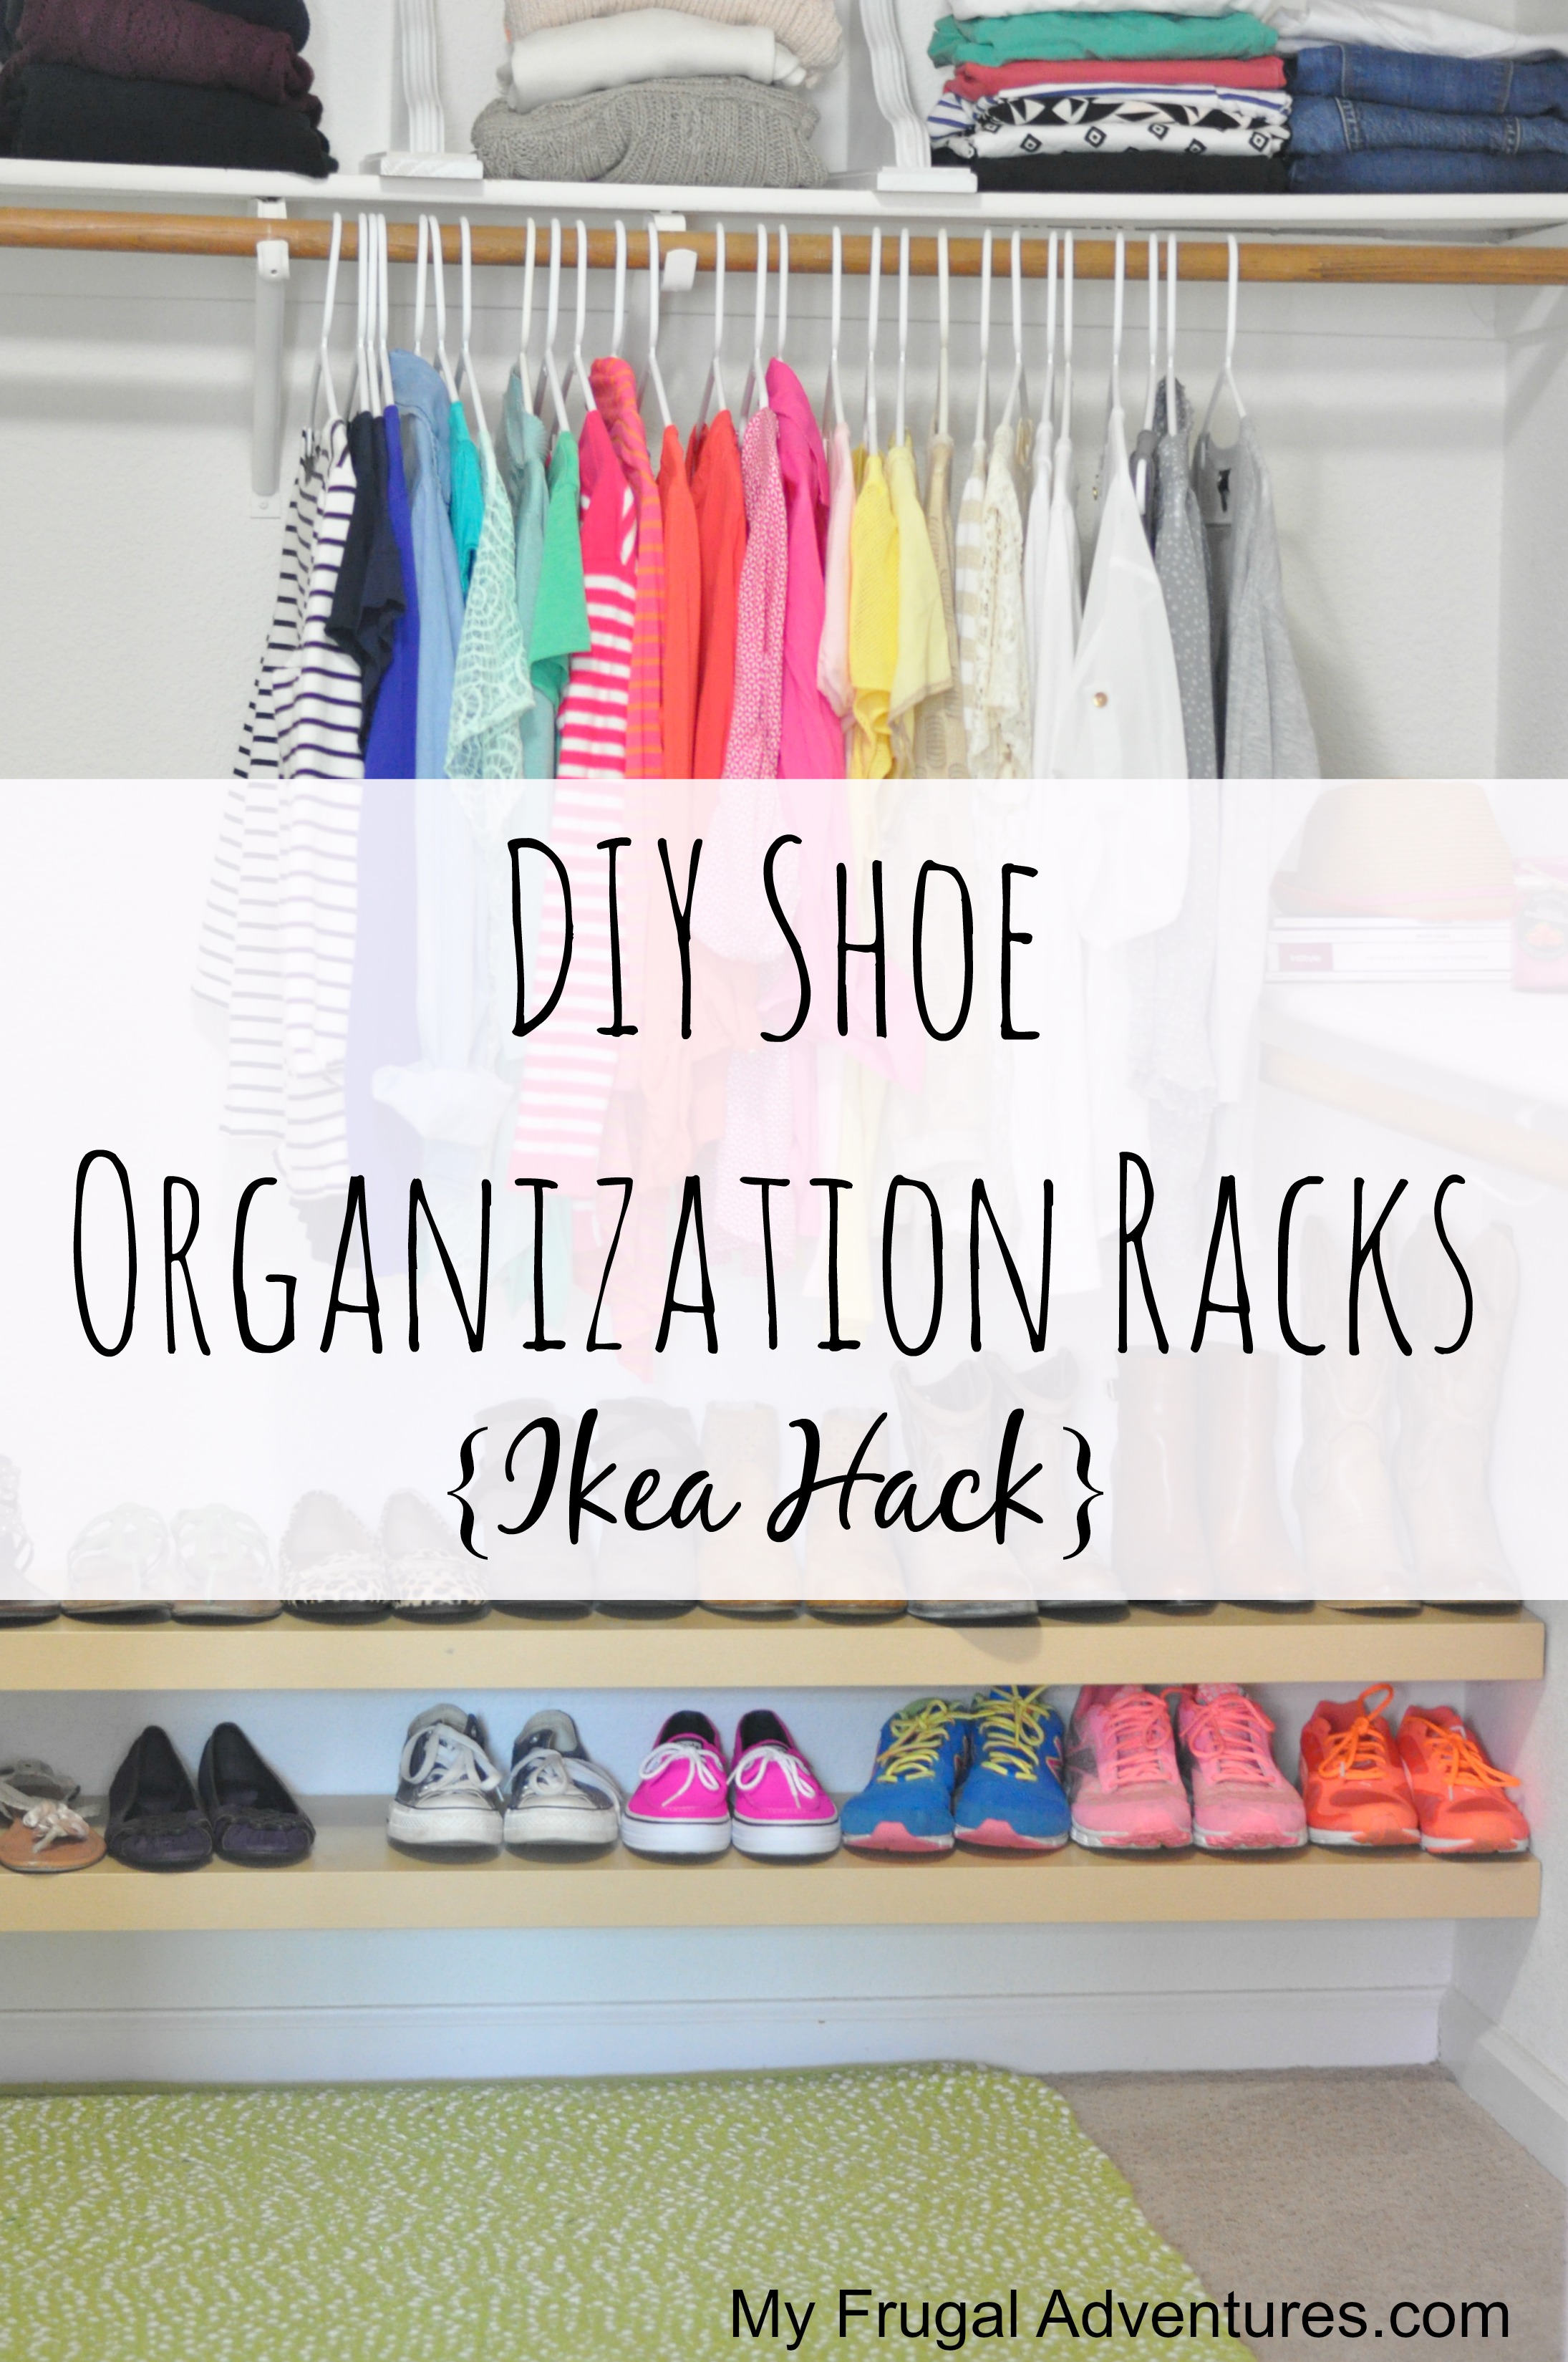 https://myfrugaladventures.com/wp-content/uploads/2014/02/DIY-Shoe-Organization-Racks-Ikea-Hack-Super-simple-floating-shelves-to-organize-your-closet-Inexpensive-and-so-easy-to-do.jpg